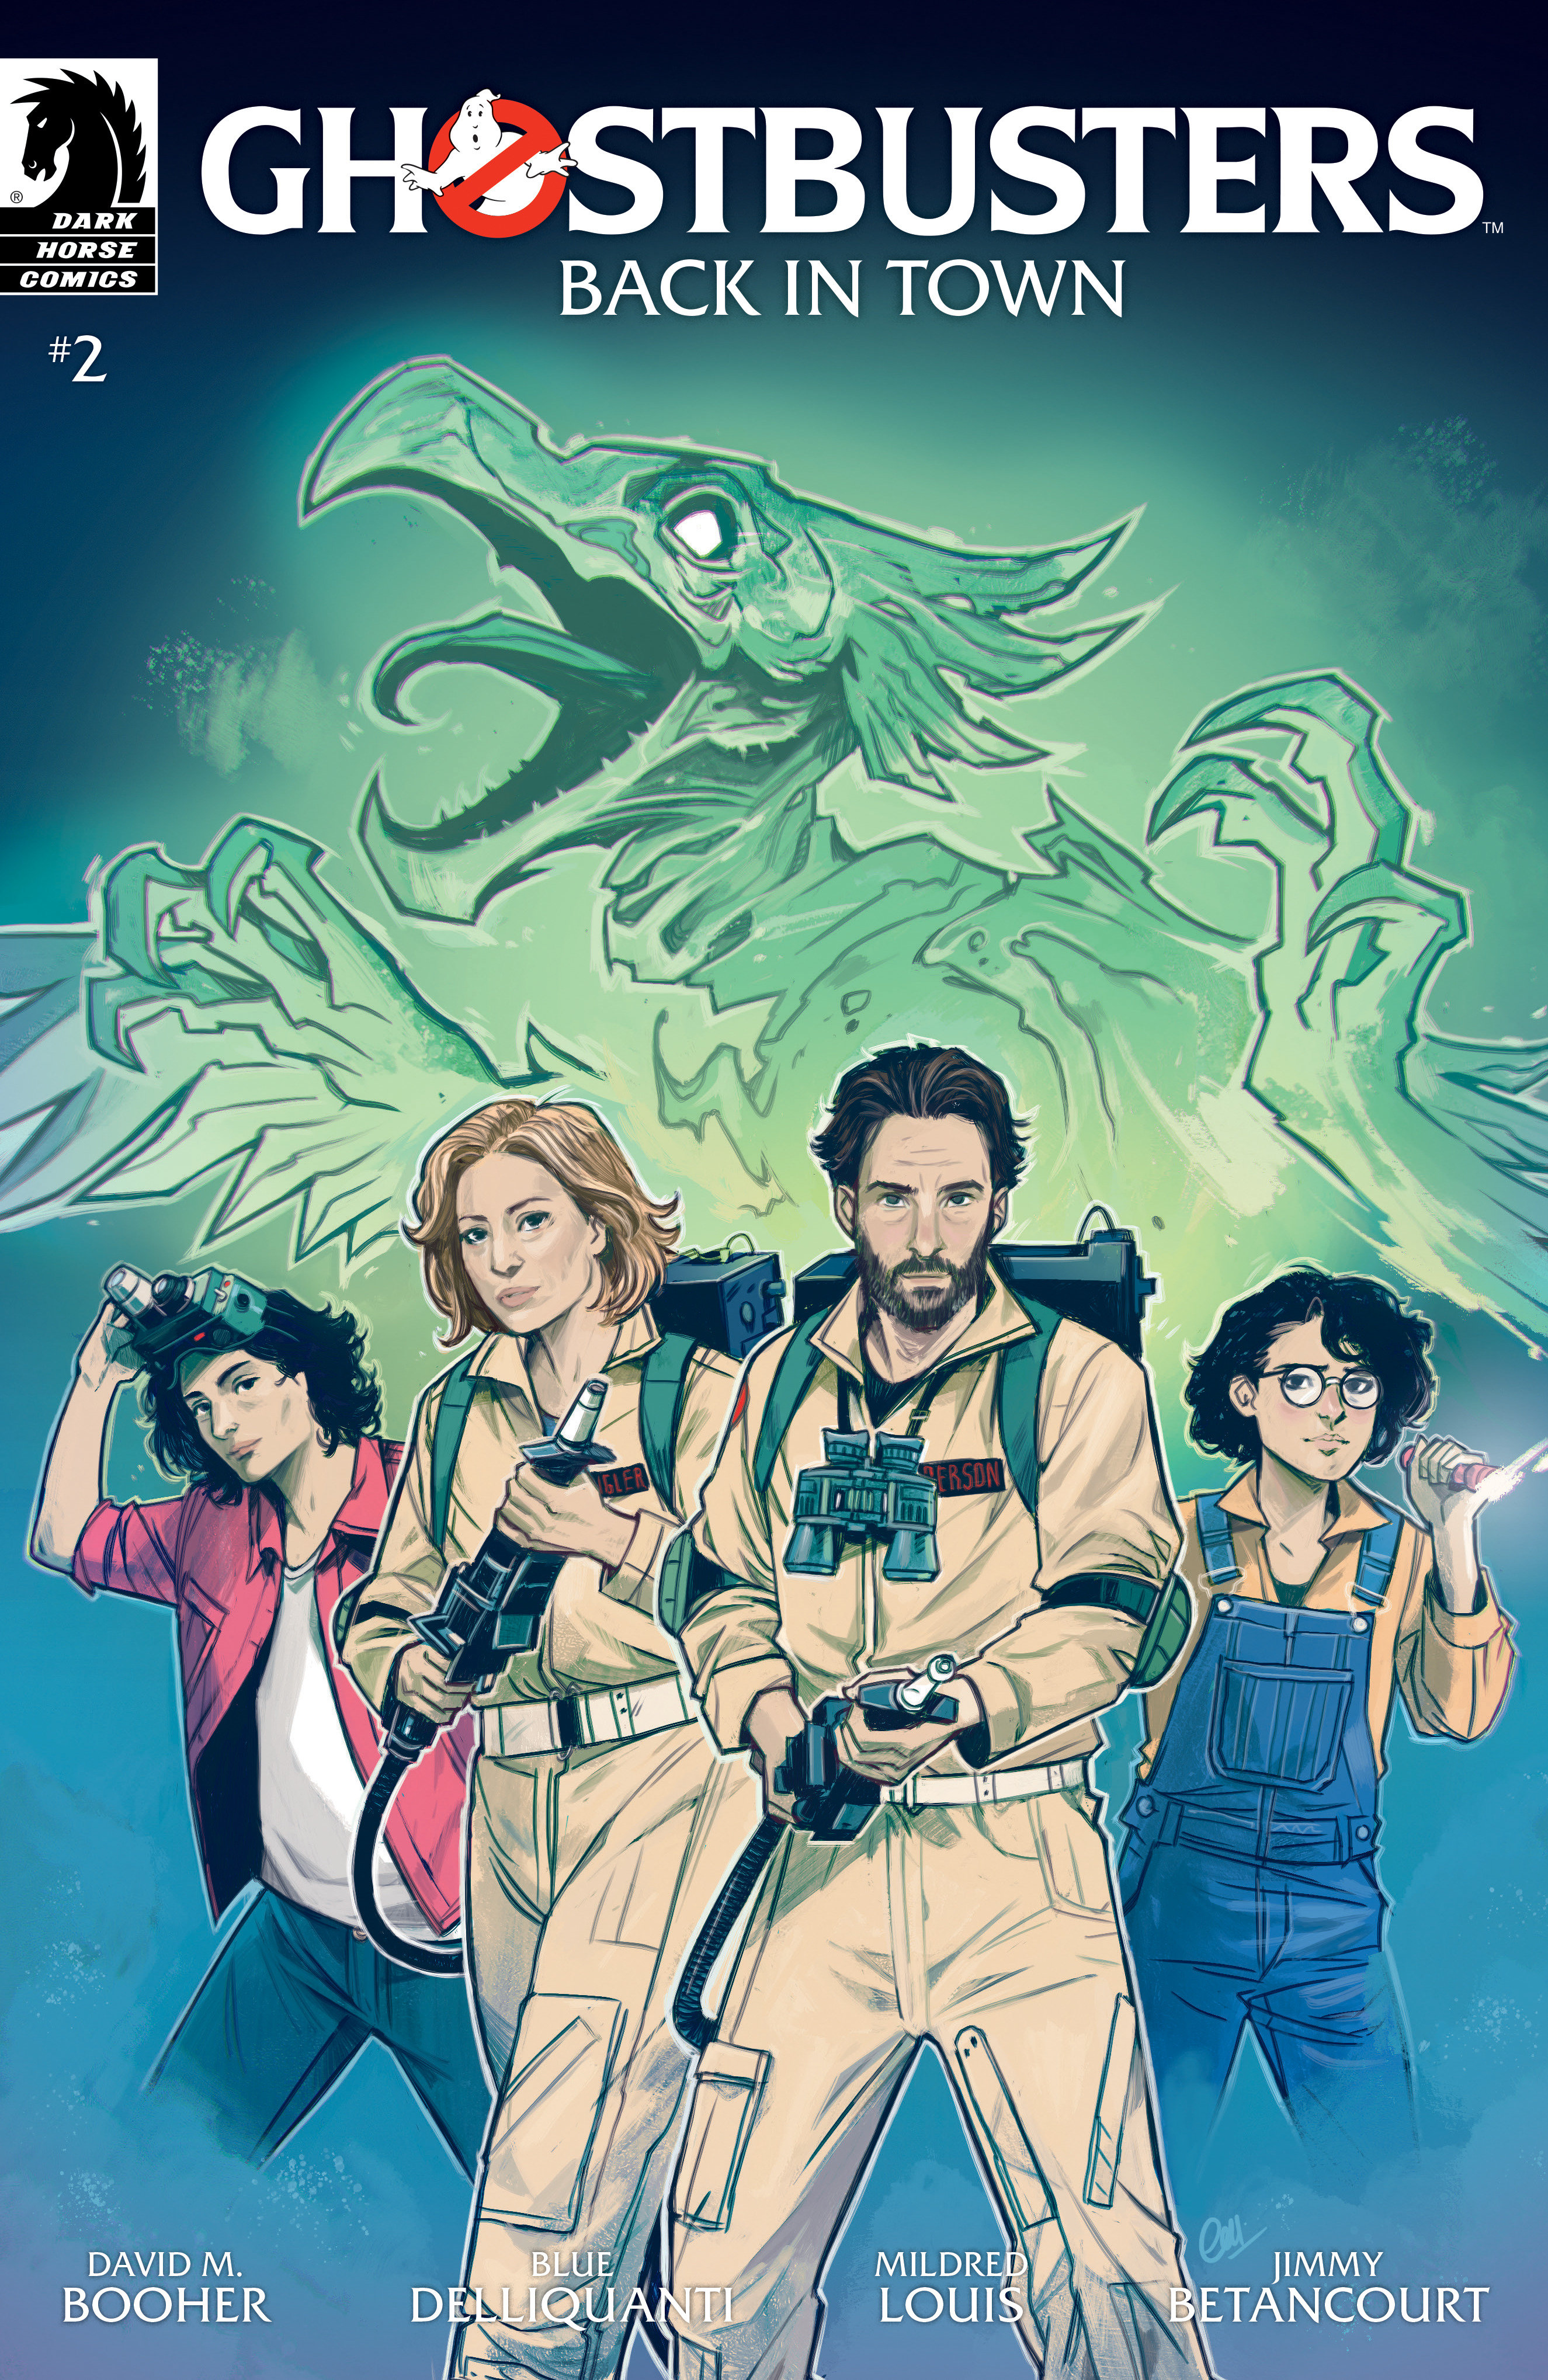 Ghostbusters Back in Town #2 Cover A (Caspar Wijngaard)